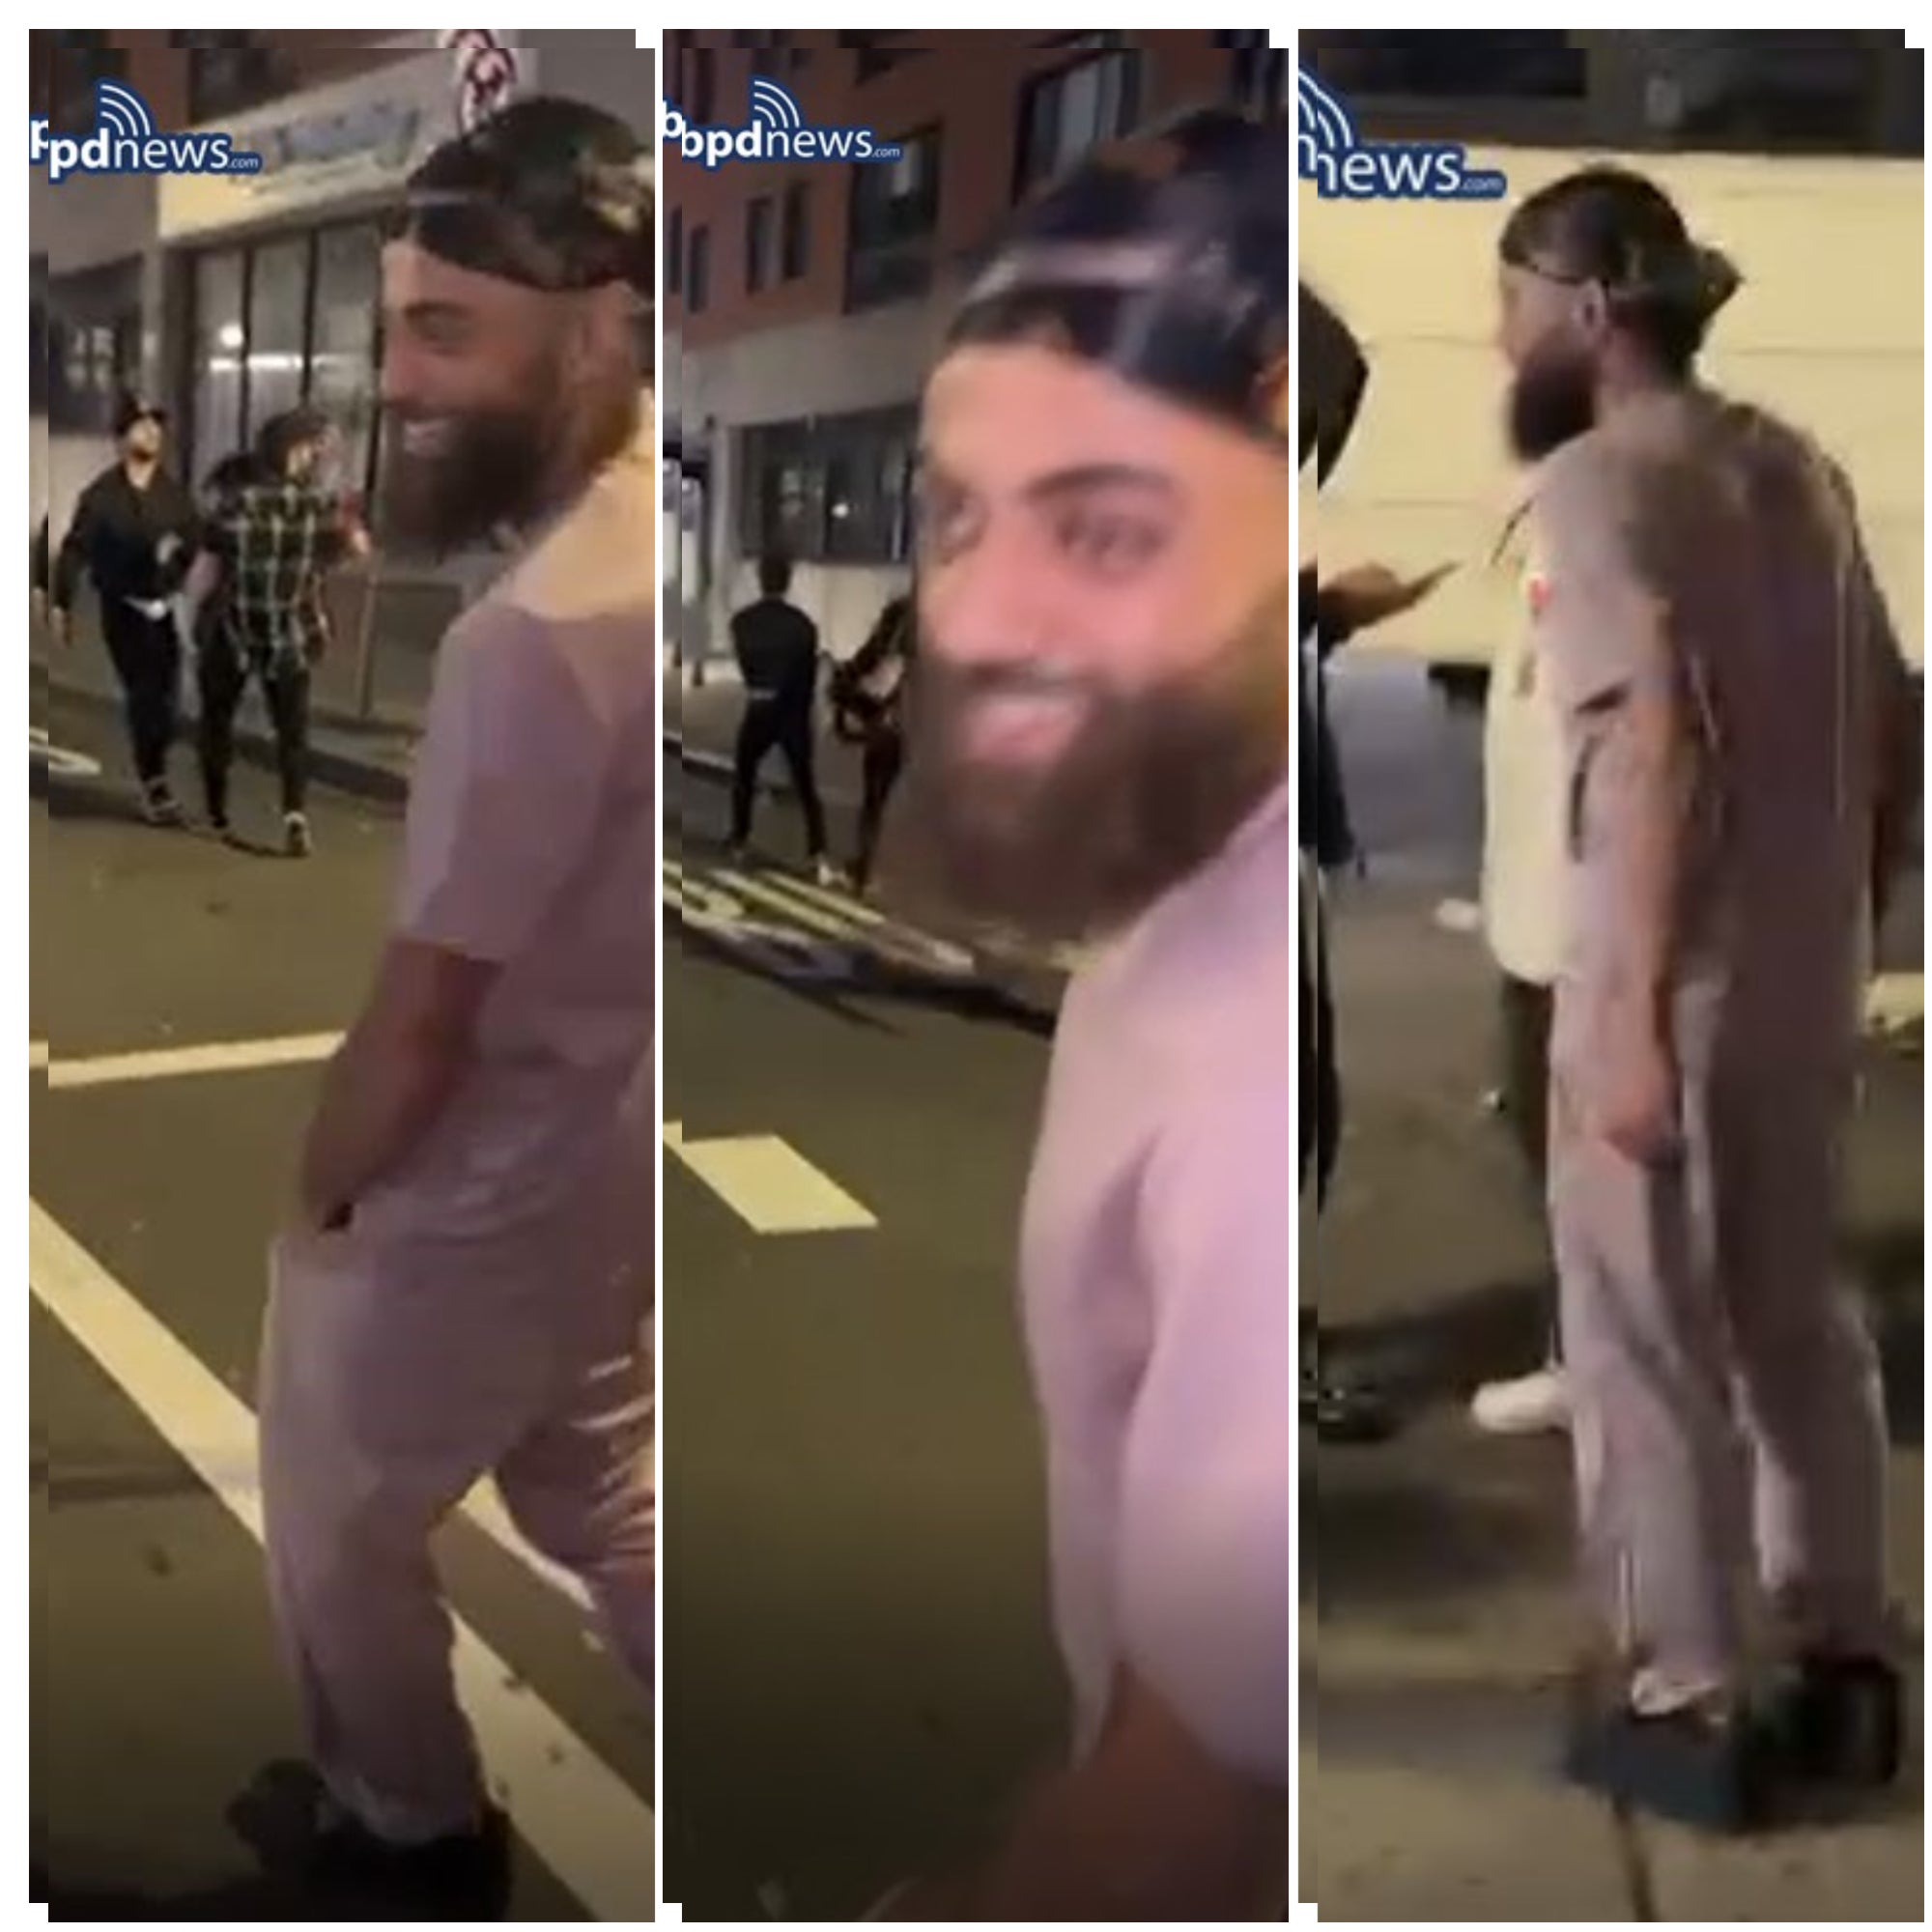 alt= three different angles of a suspect with facial hair. The suspect appears tall and slender, possibly wearing dark sneakers and light-colored pants and a matching shirt.